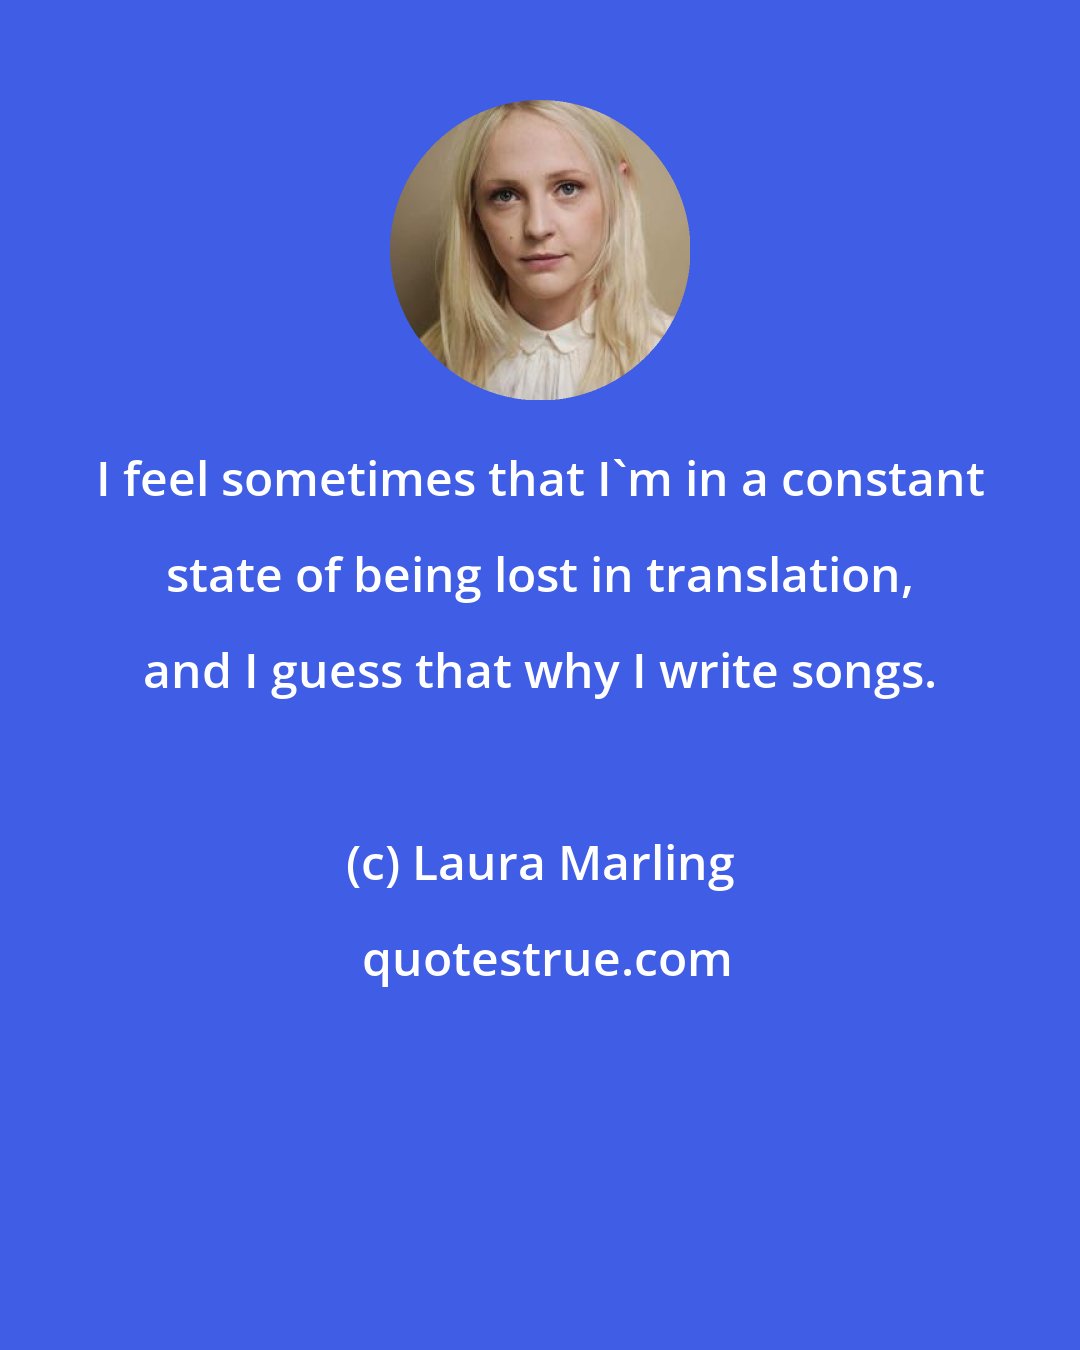 Laura Marling: I feel sometimes that I'm in a constant state of being lost in translation, and I guess that why I write songs.